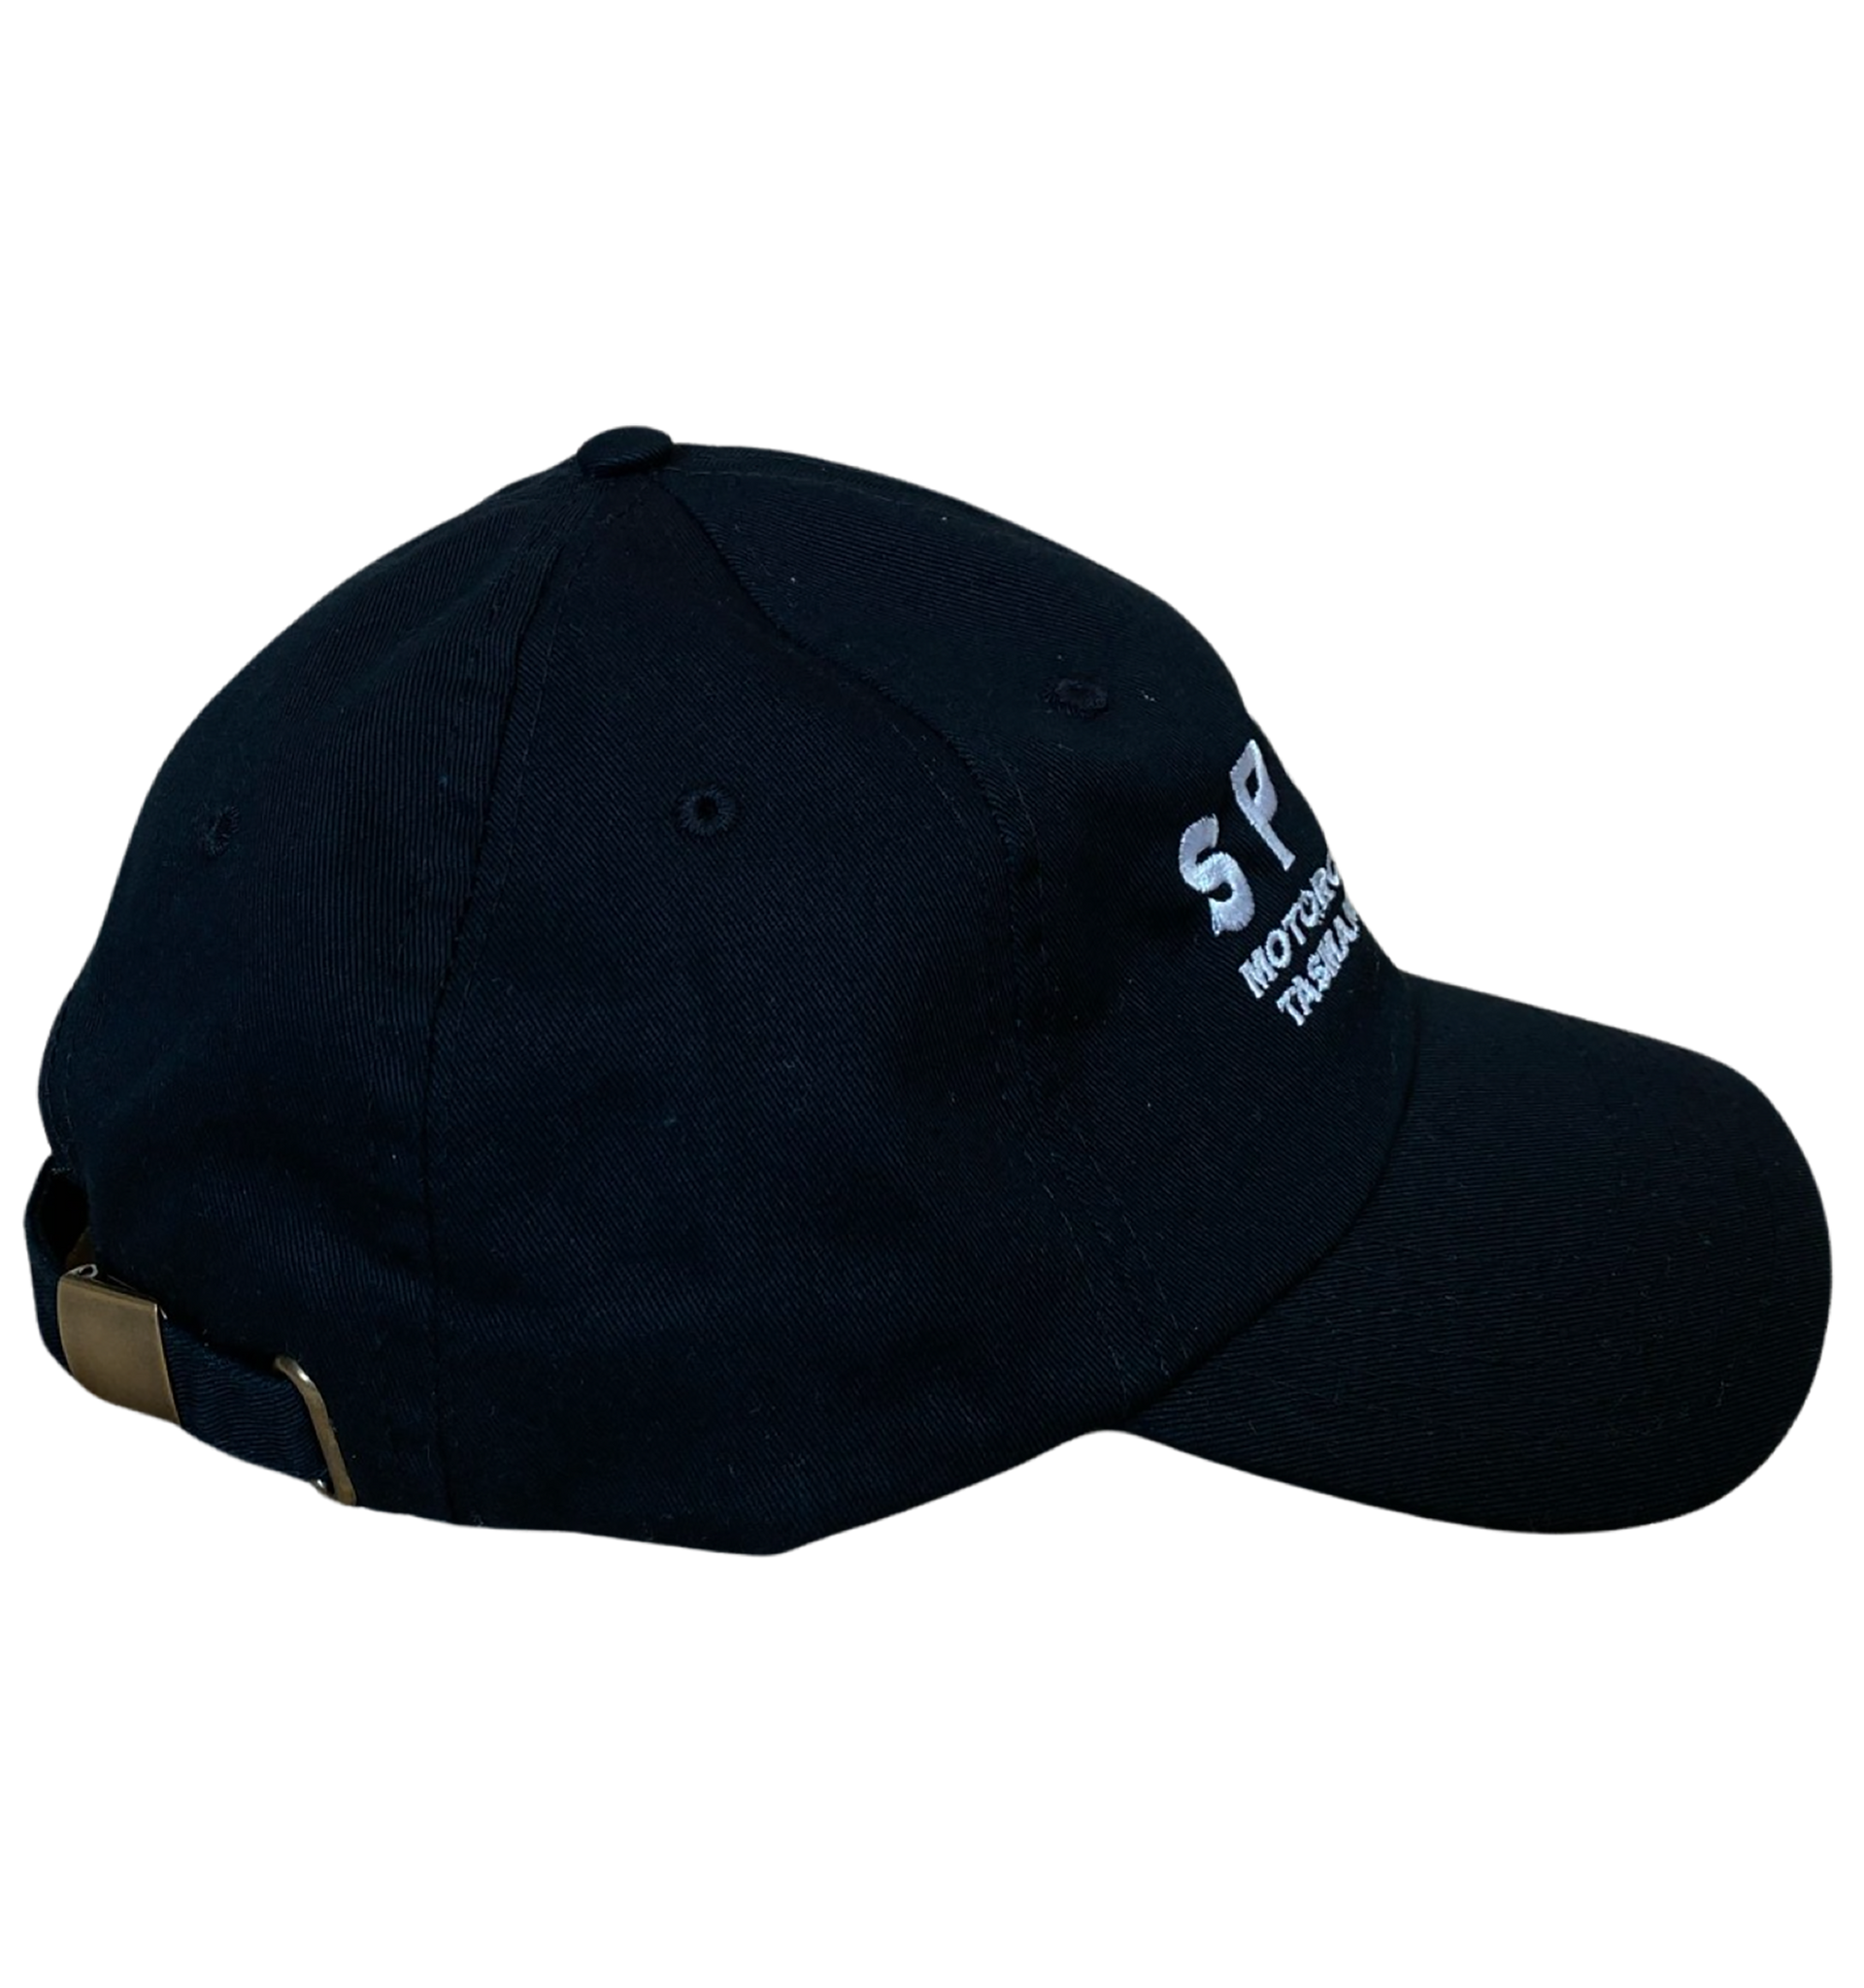 Spoke Black Embroidered Washed Chino Twill Cap - Location